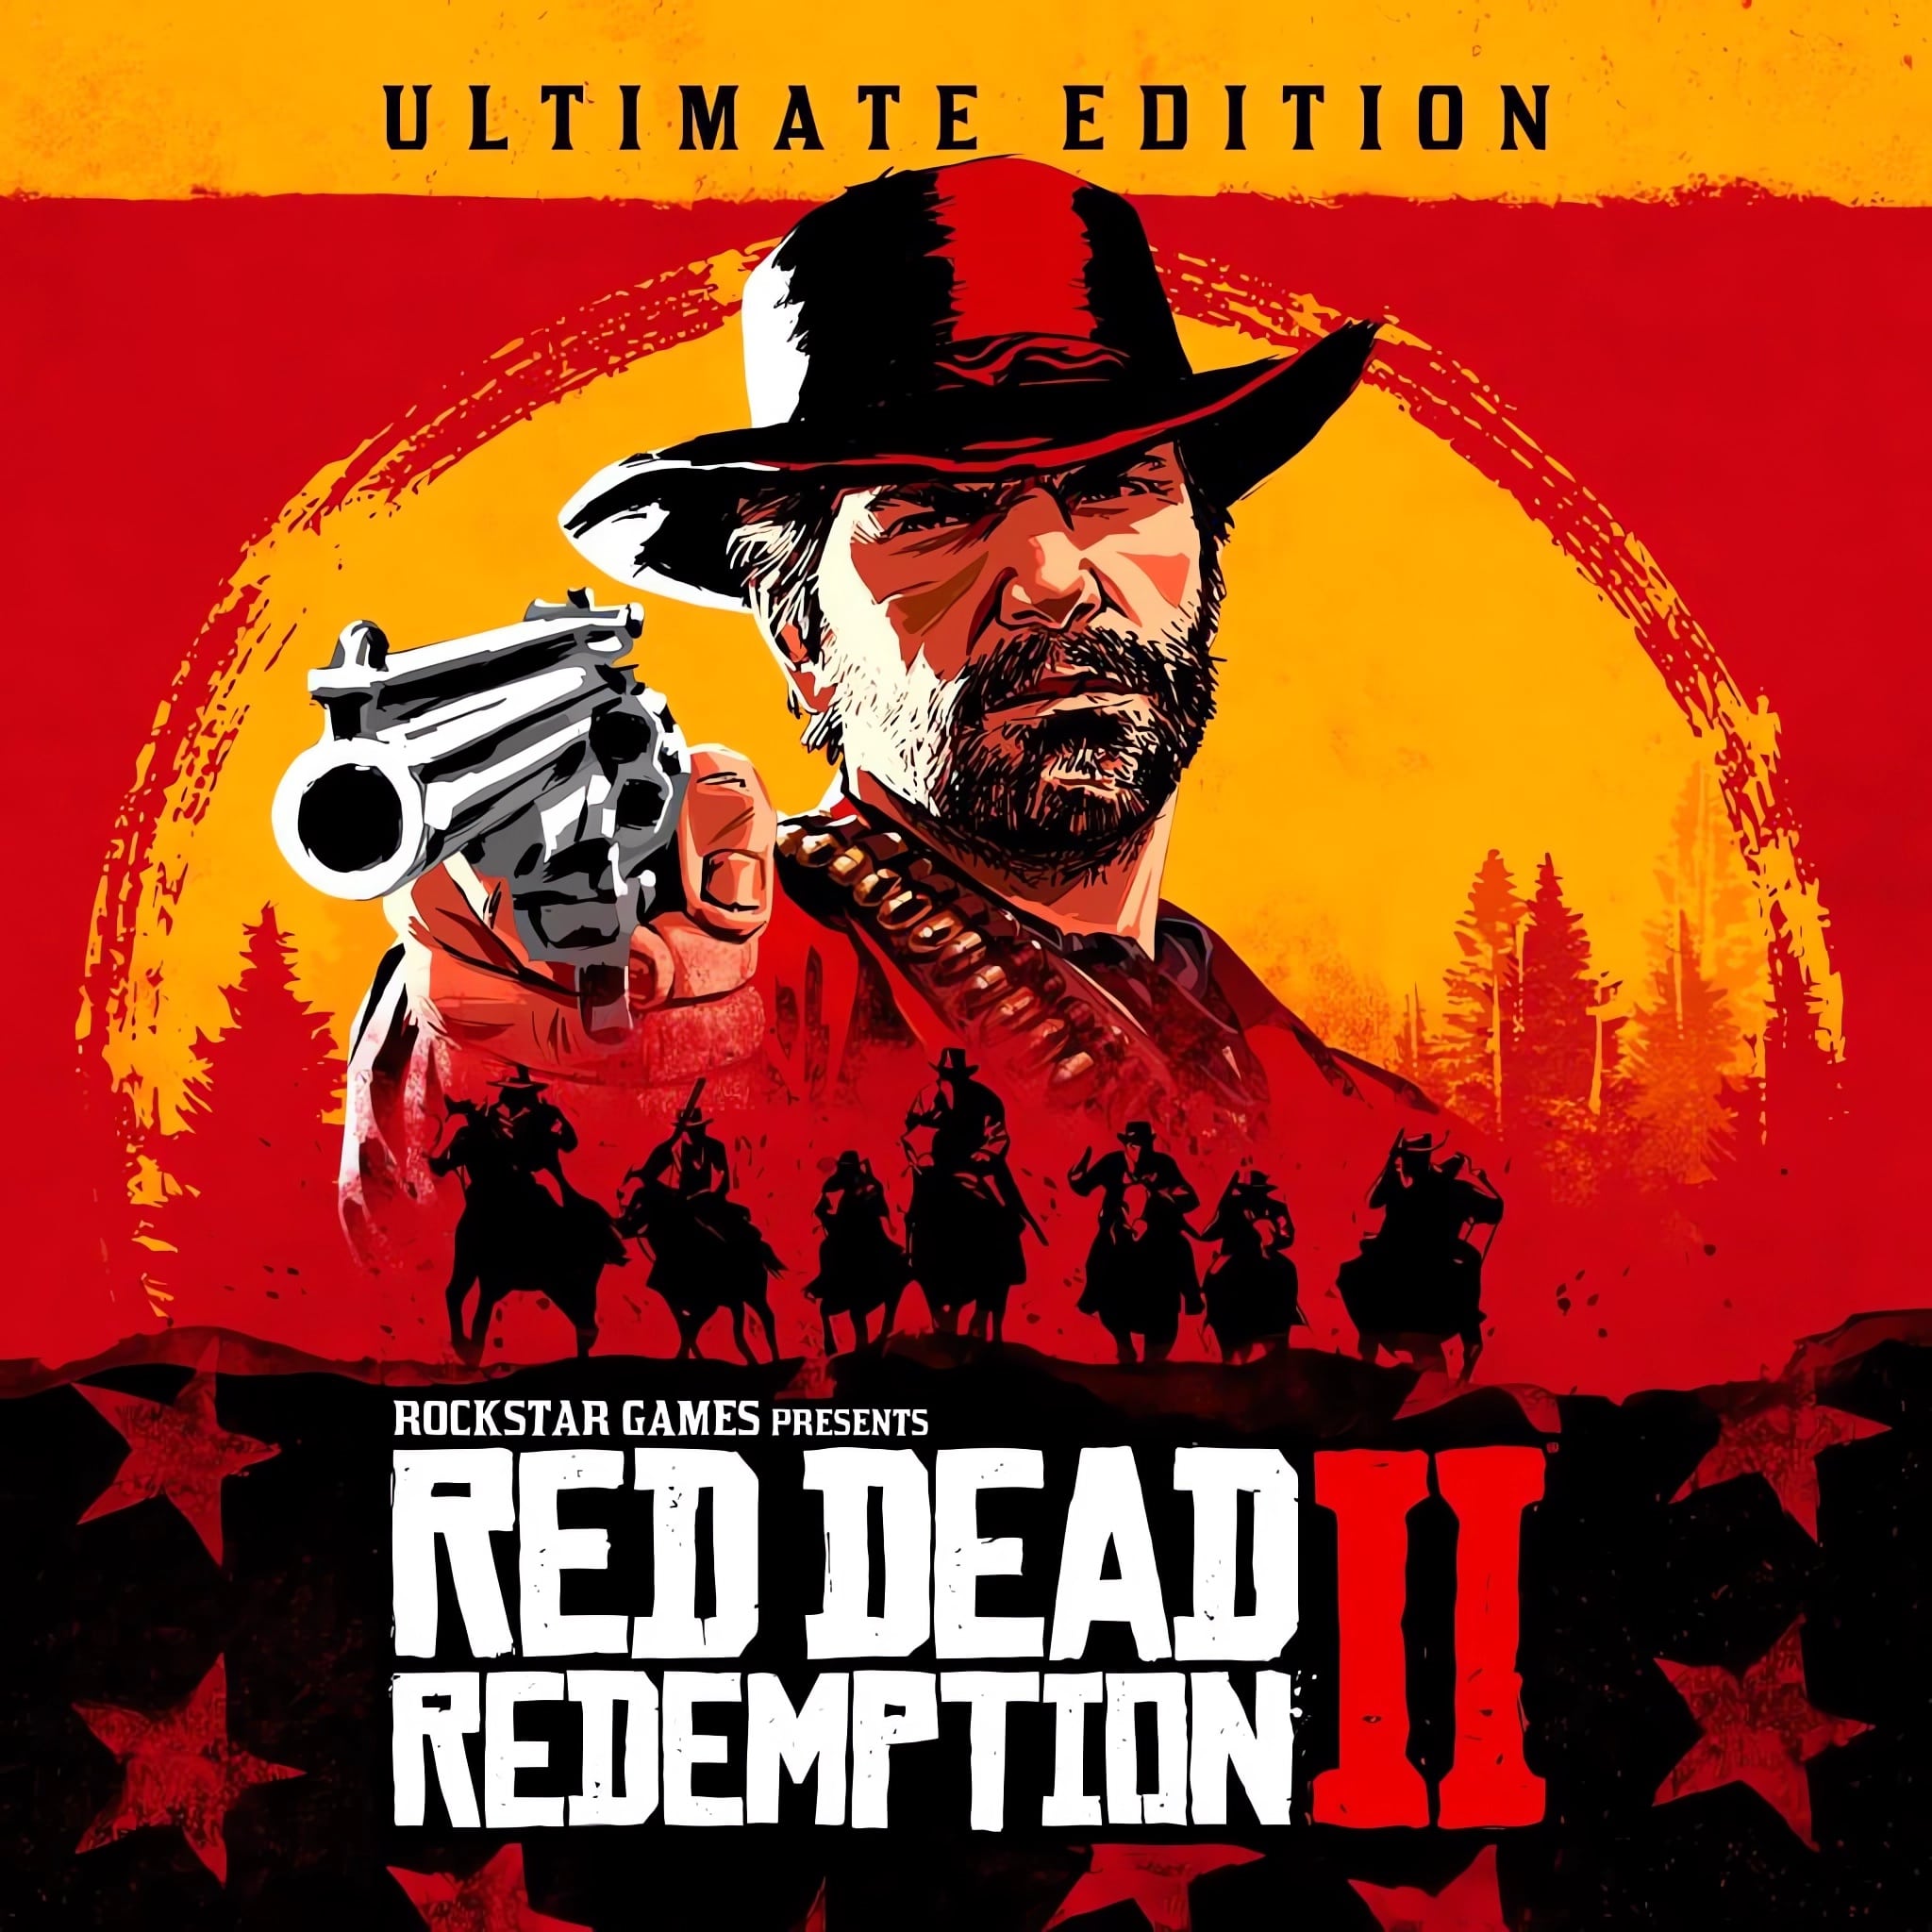 Game One PH - Outlaws for life. PS4  Xbox One Red Dead Redemption 2 is now  available for PRE-ORDER at Game One PH An epic tale of life in America at